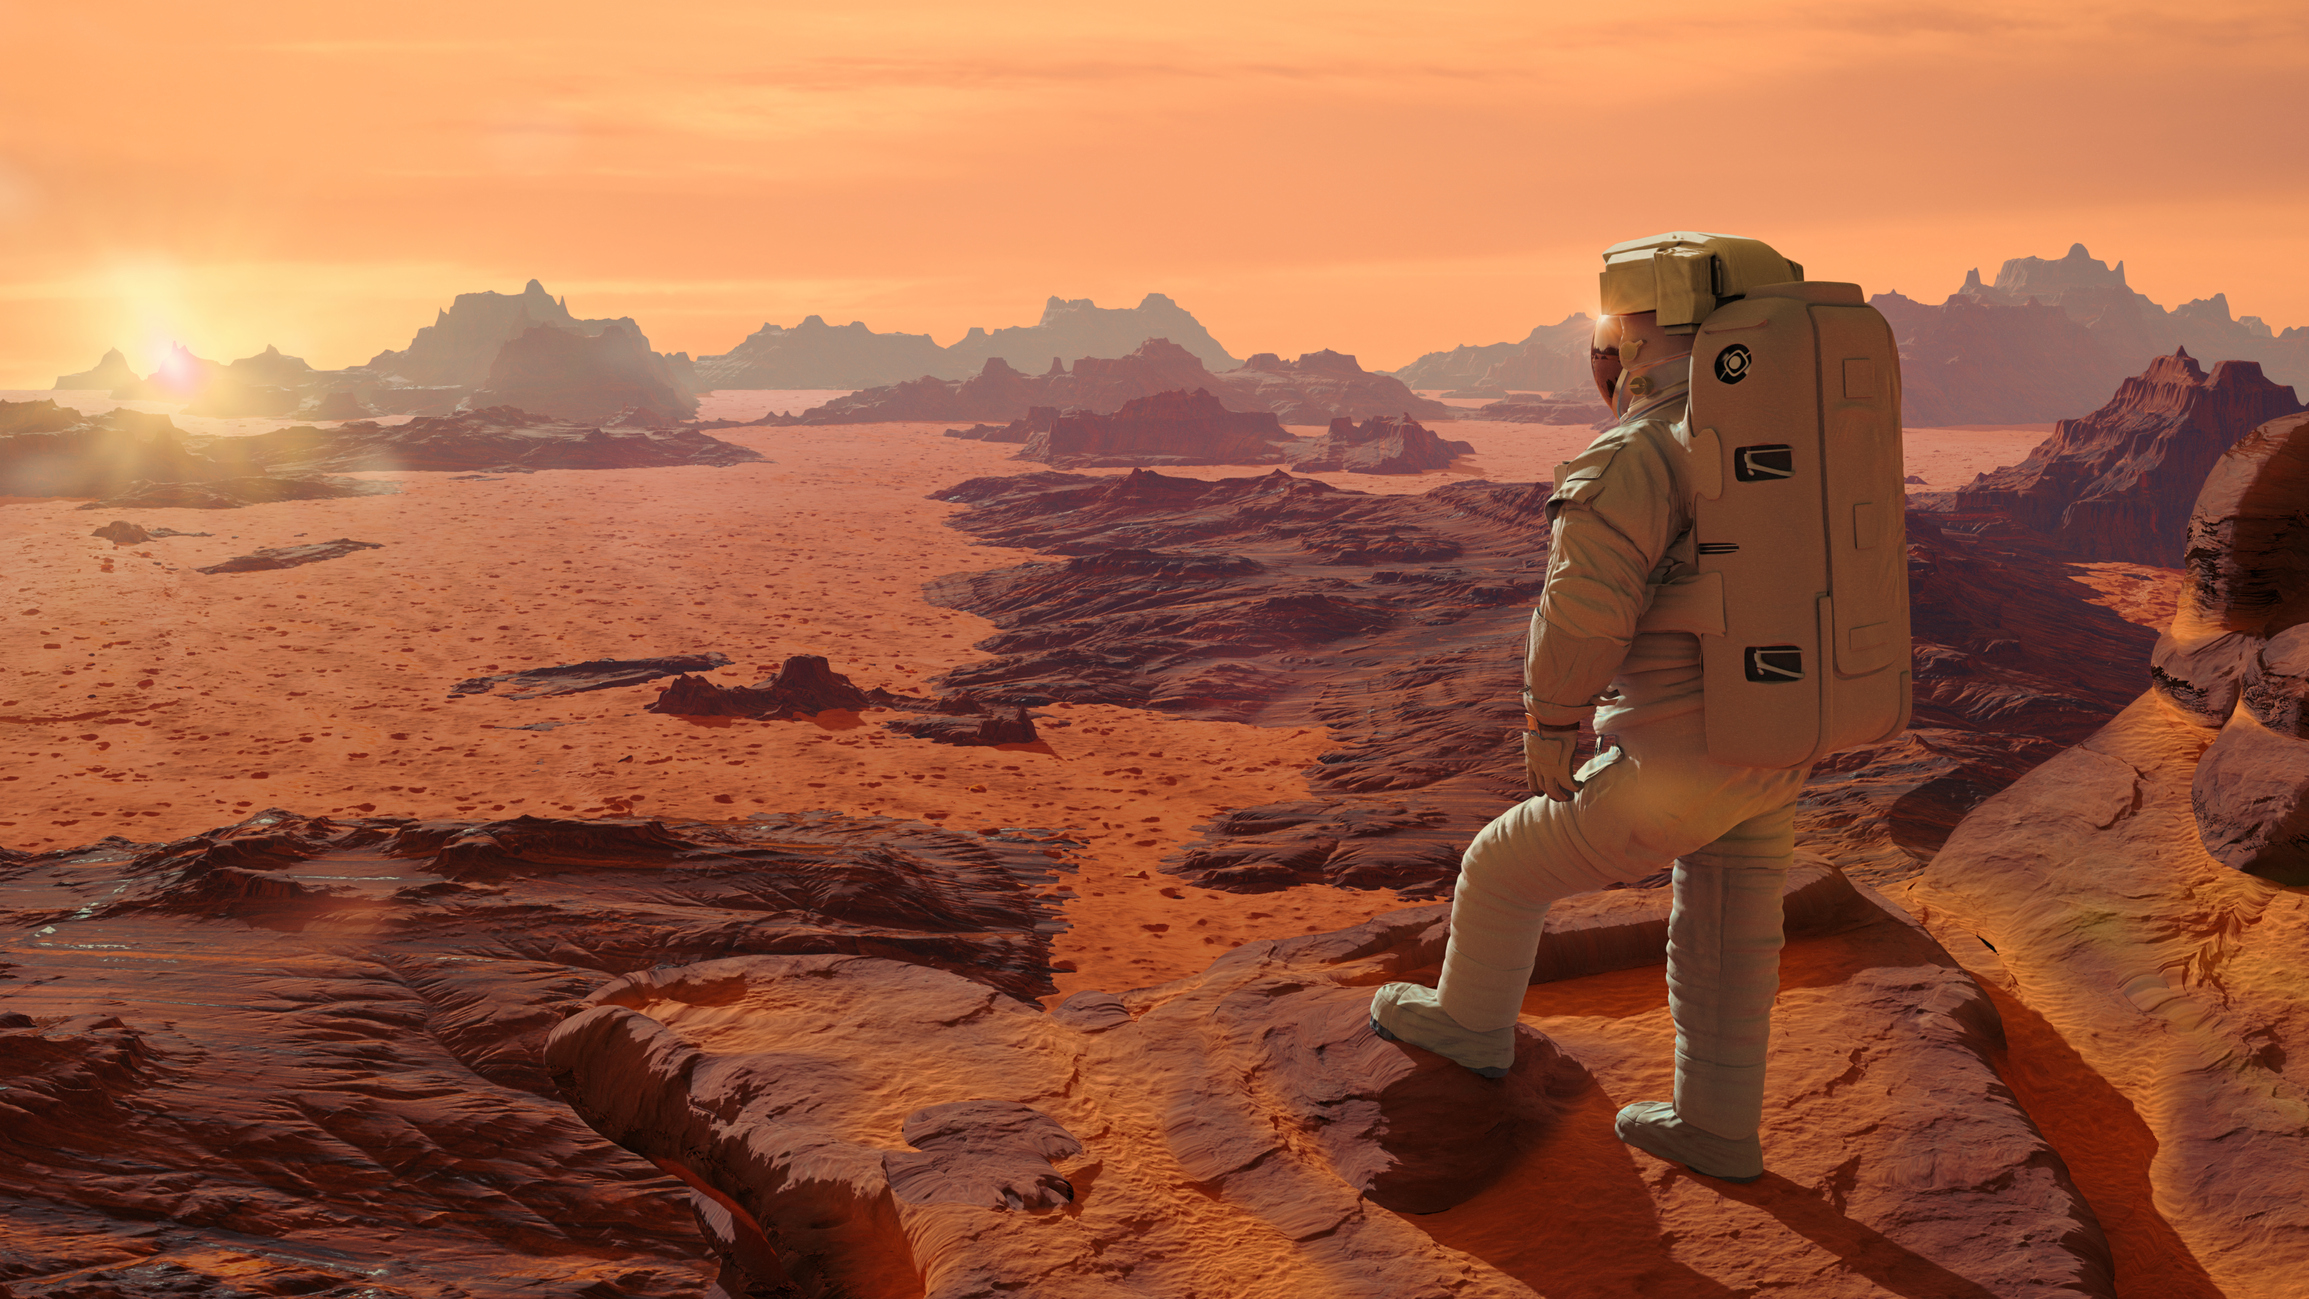 Solar power is better than nuclear for astronauts on Mars, study suggests thumbnail